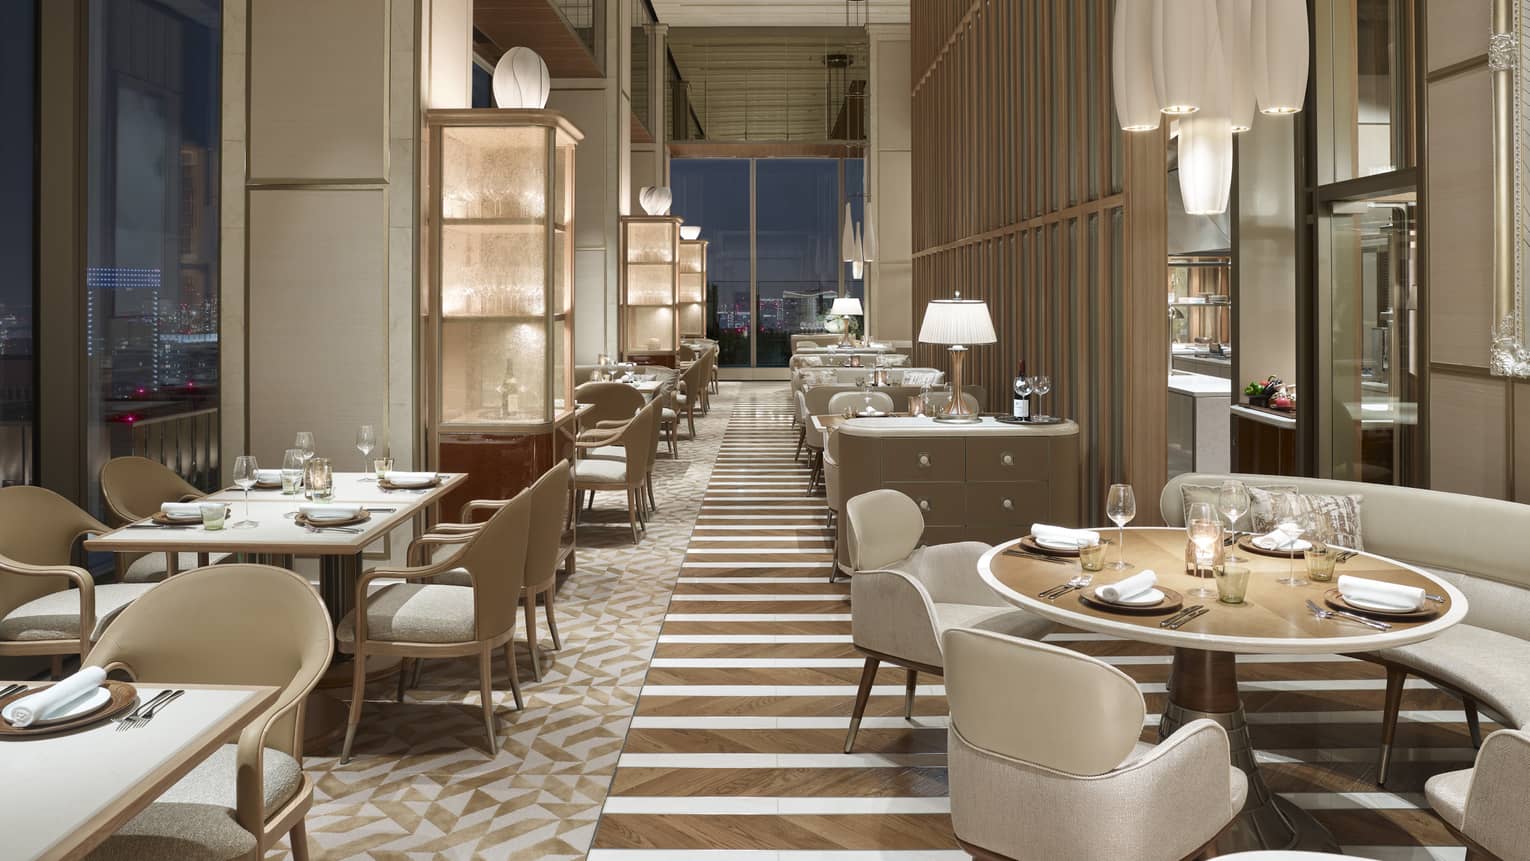 Restaurant with off-white chairs and sofas, elegant chandeliers, windows with nighttime views